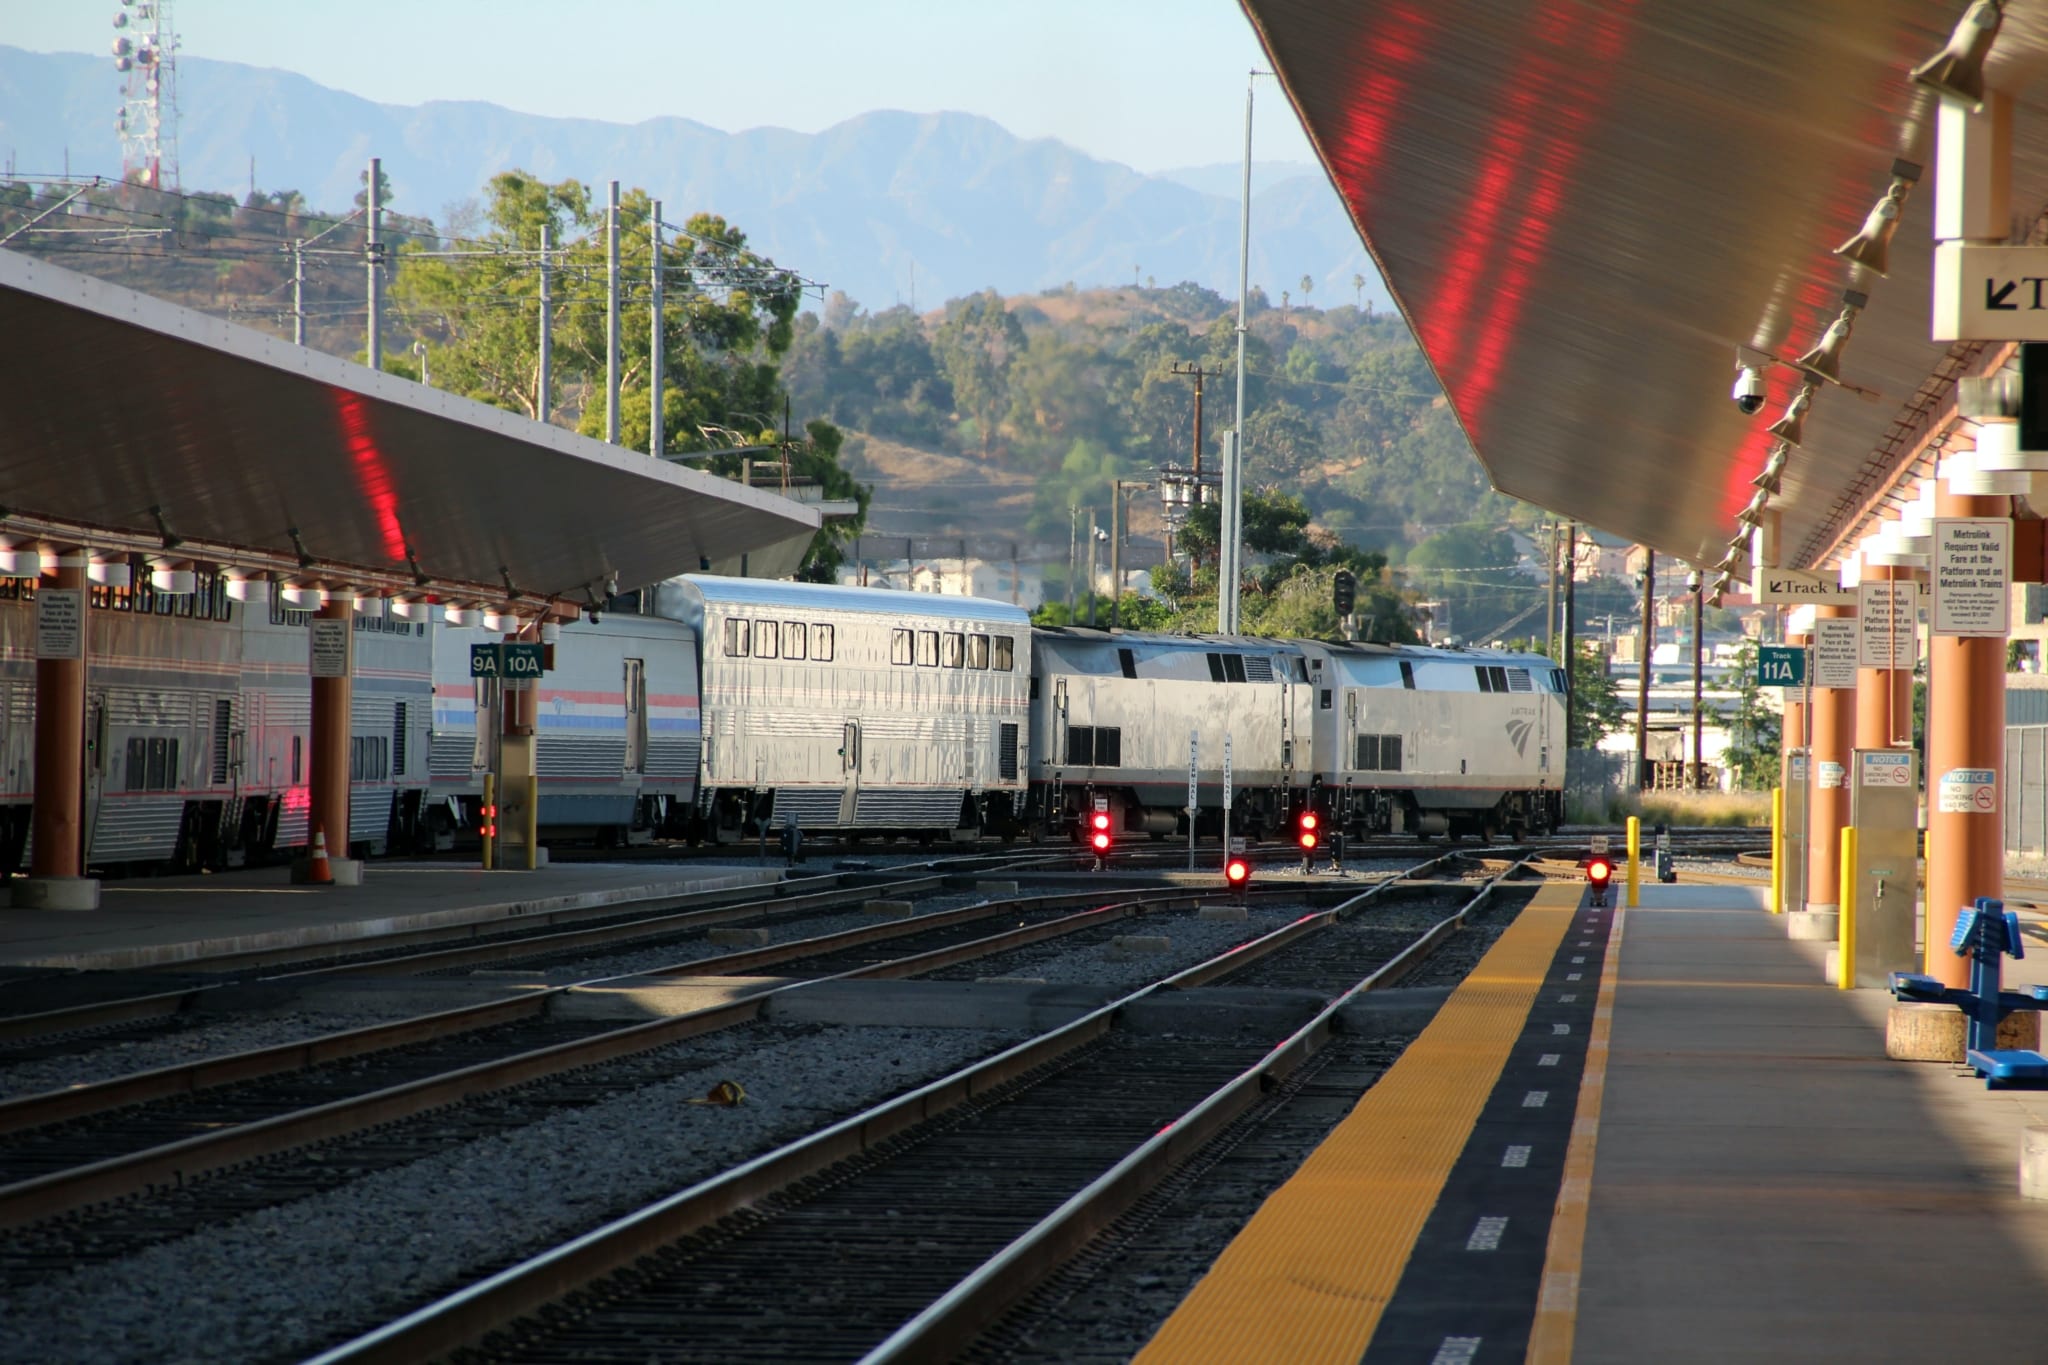 An Amtrak train bound for Chicago departs Los Angeles Union Station.